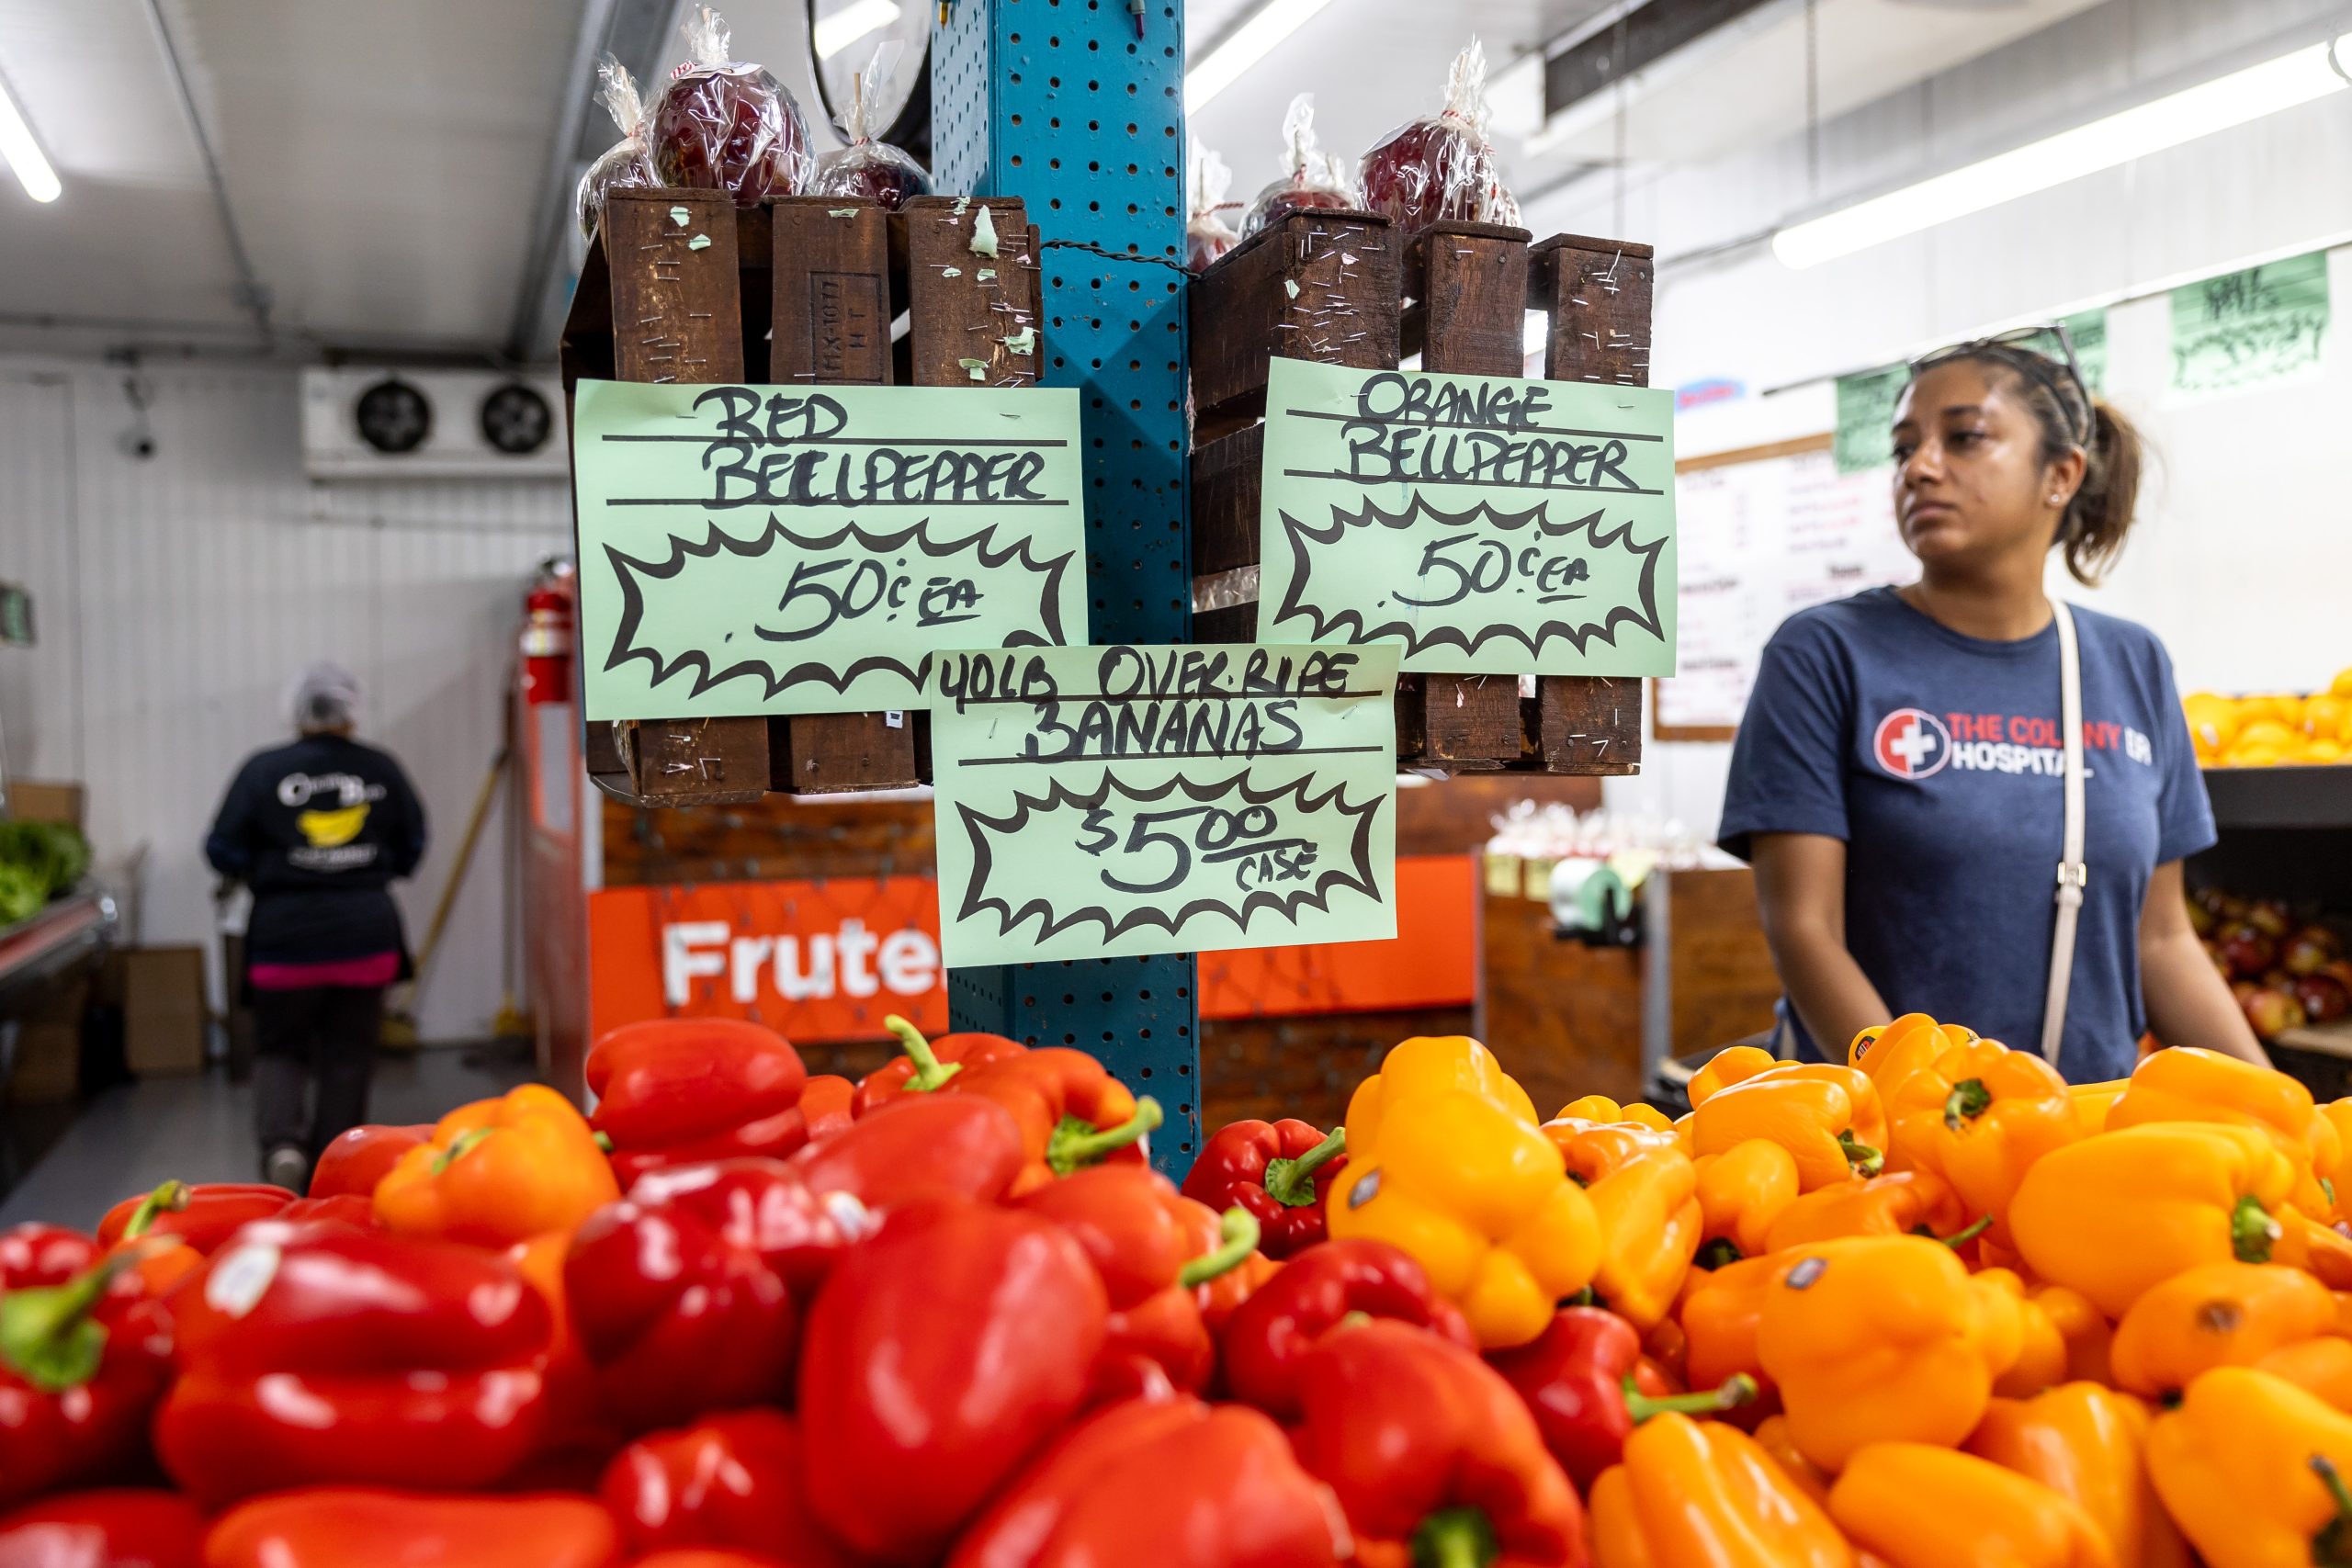 SNAP benefits doubled for fruits, veggies in San Antonio, but is it a ‘patchwork’ solution?